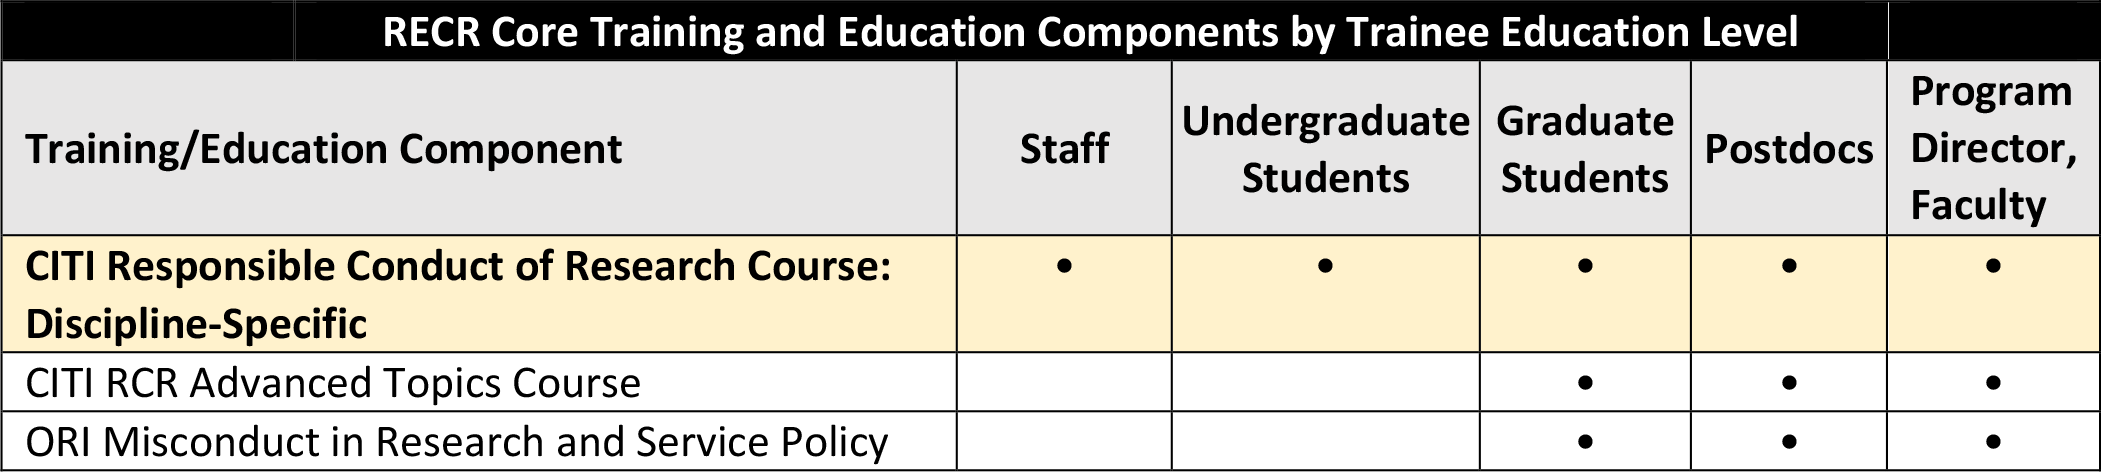 RECR Core Training and Education Components by Trainee Education Level (USDA) Table